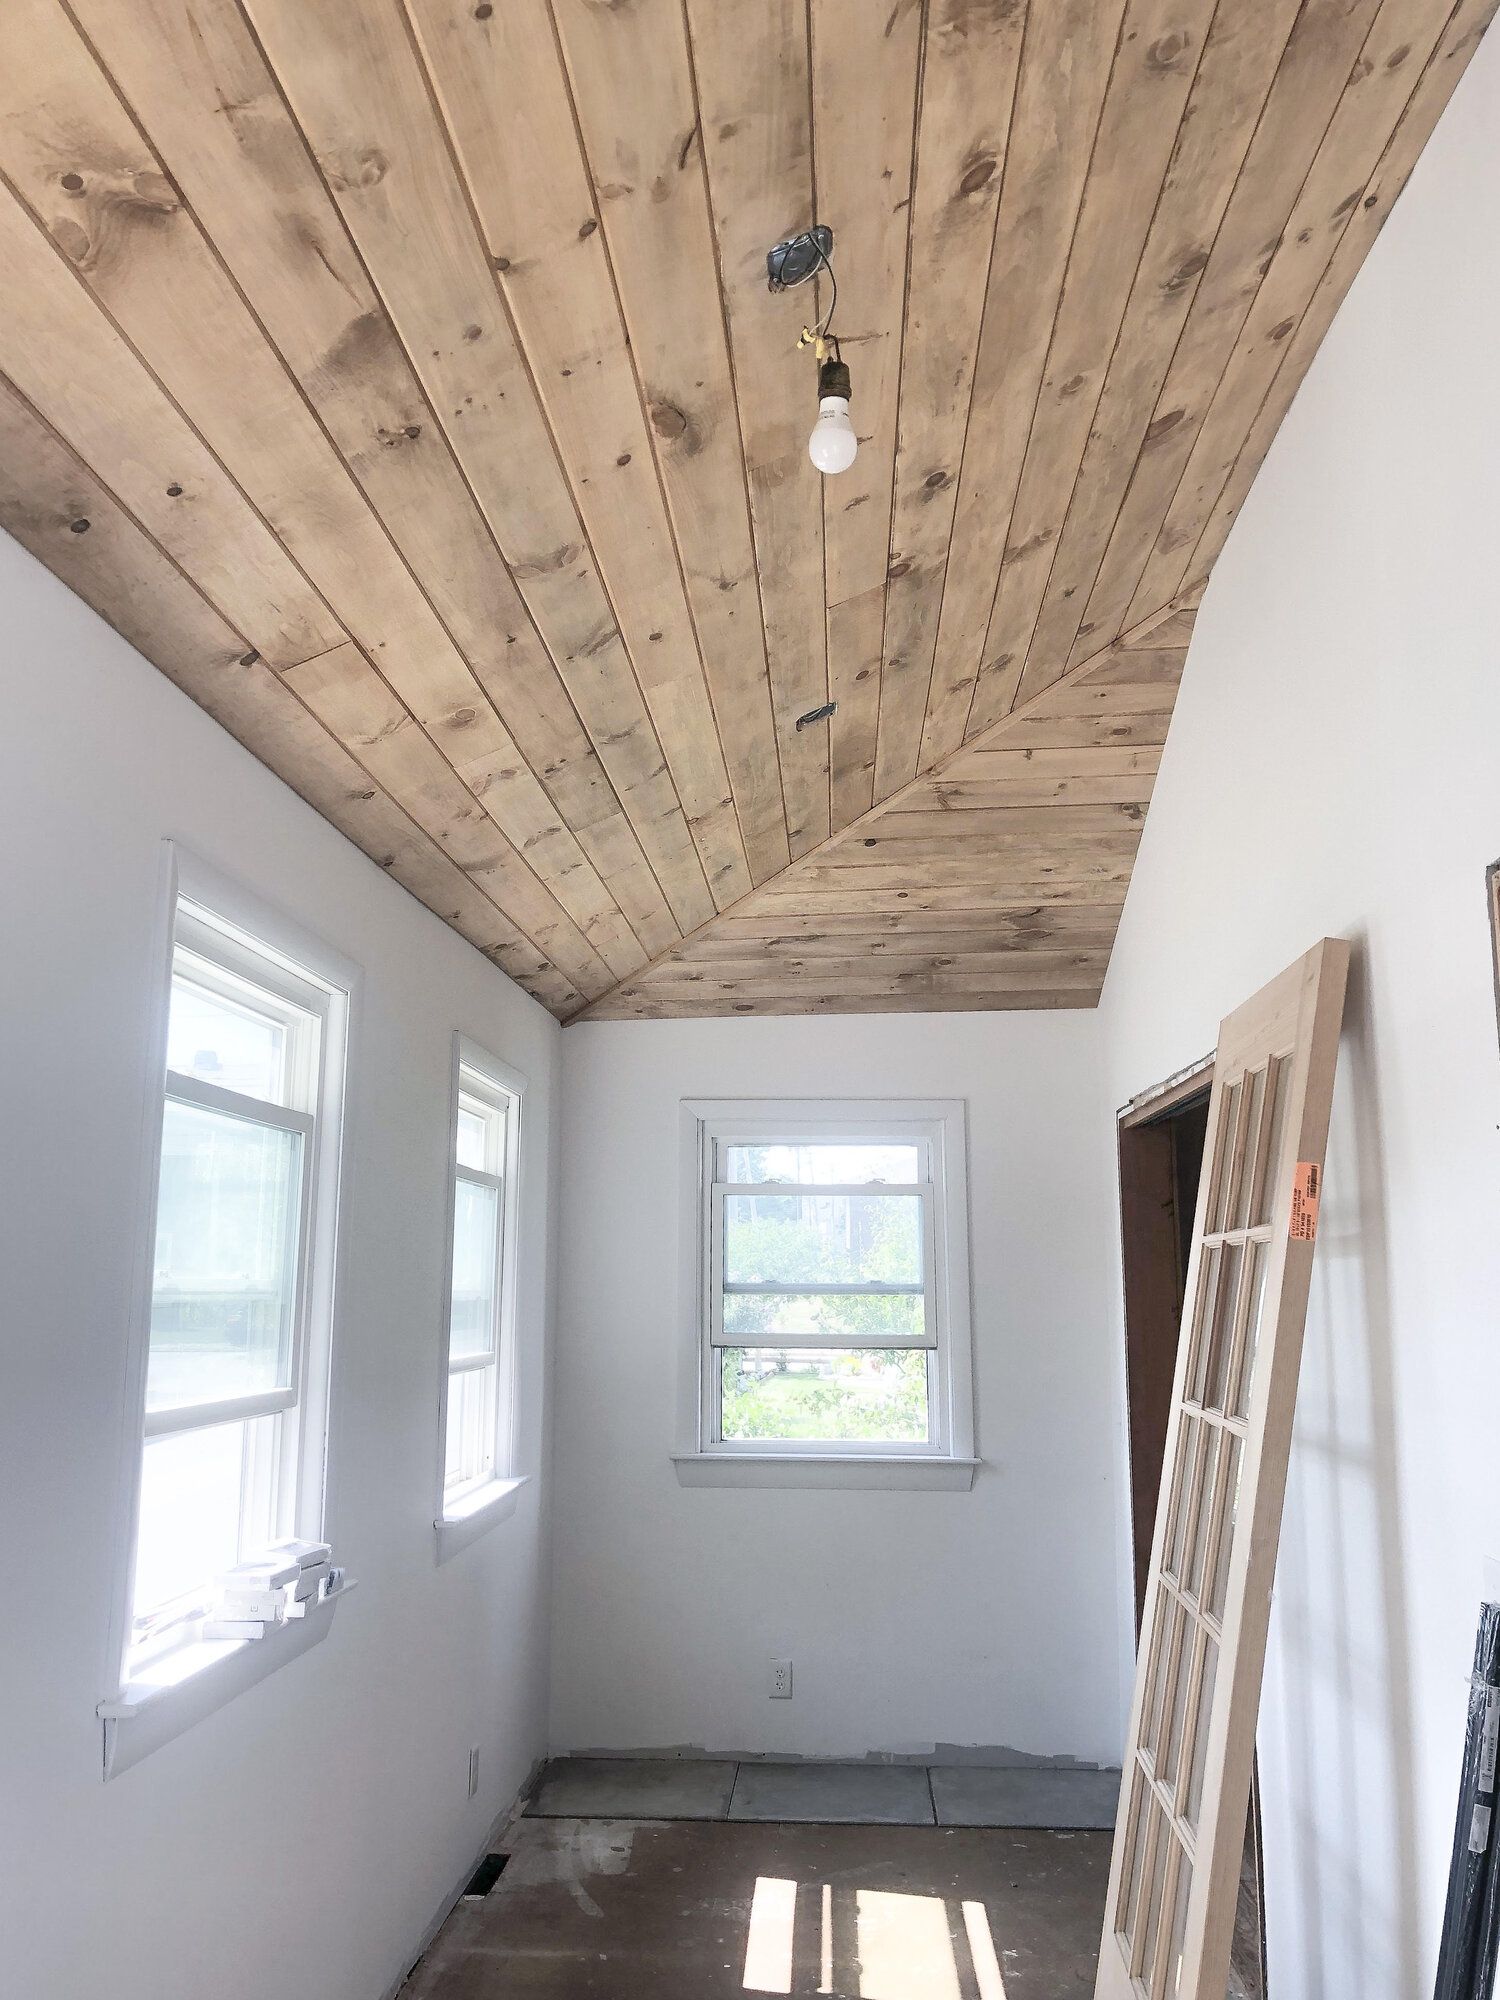 How to Stain and Install a Wood Plank Ceiling — With Aubreyy (1)